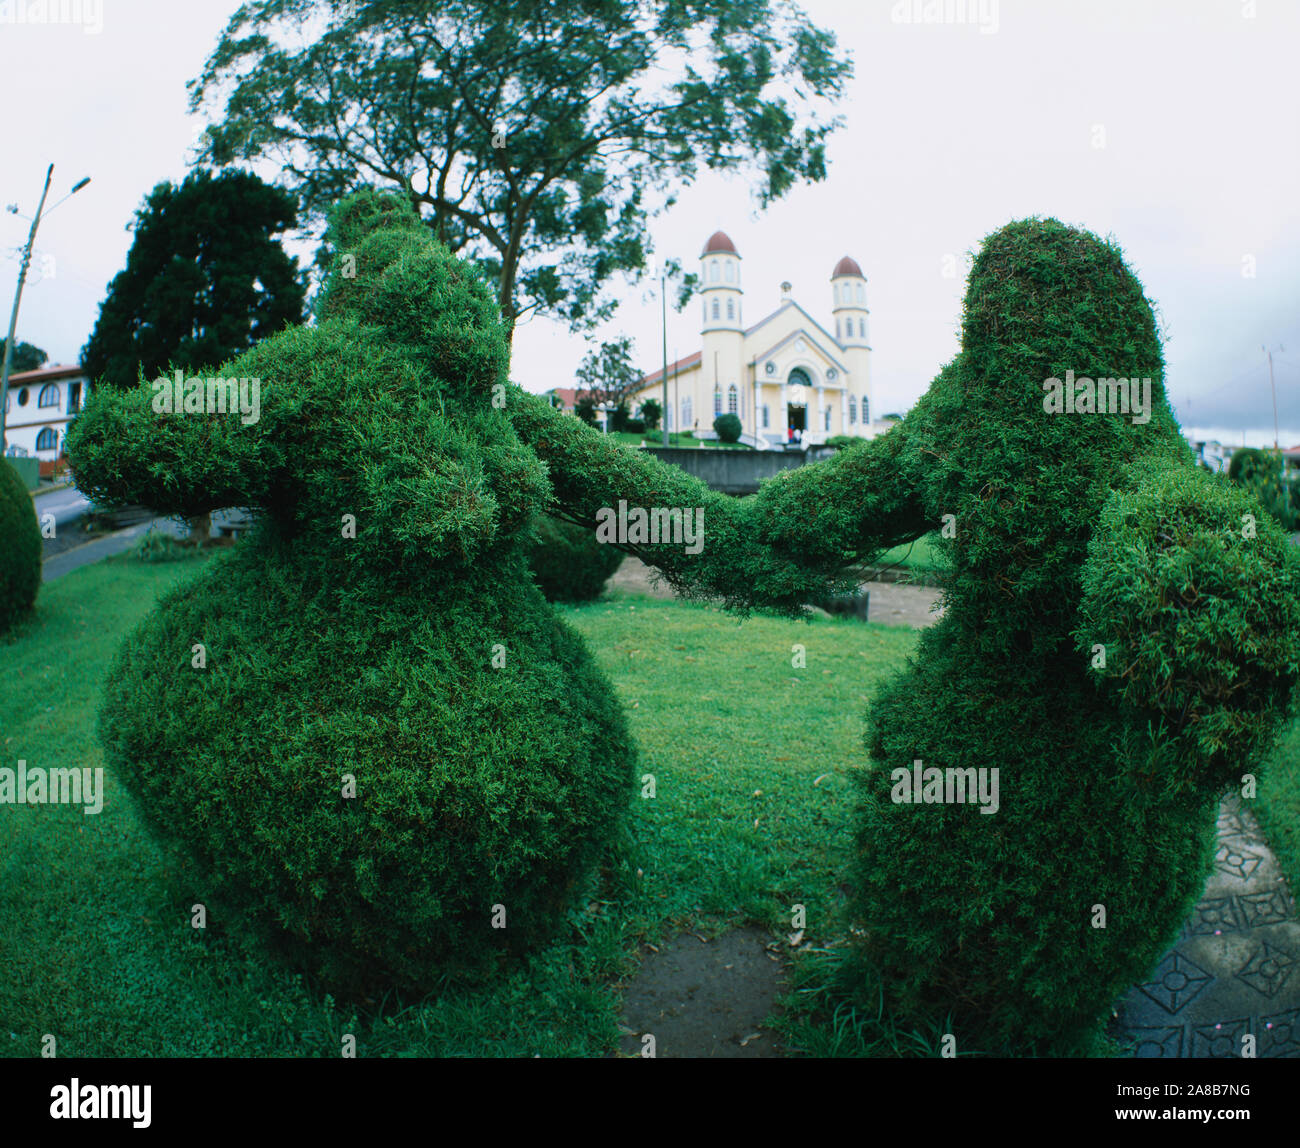 Topiary in a garden with a church in the background, Zarcero, Costa Rica Stock Photo